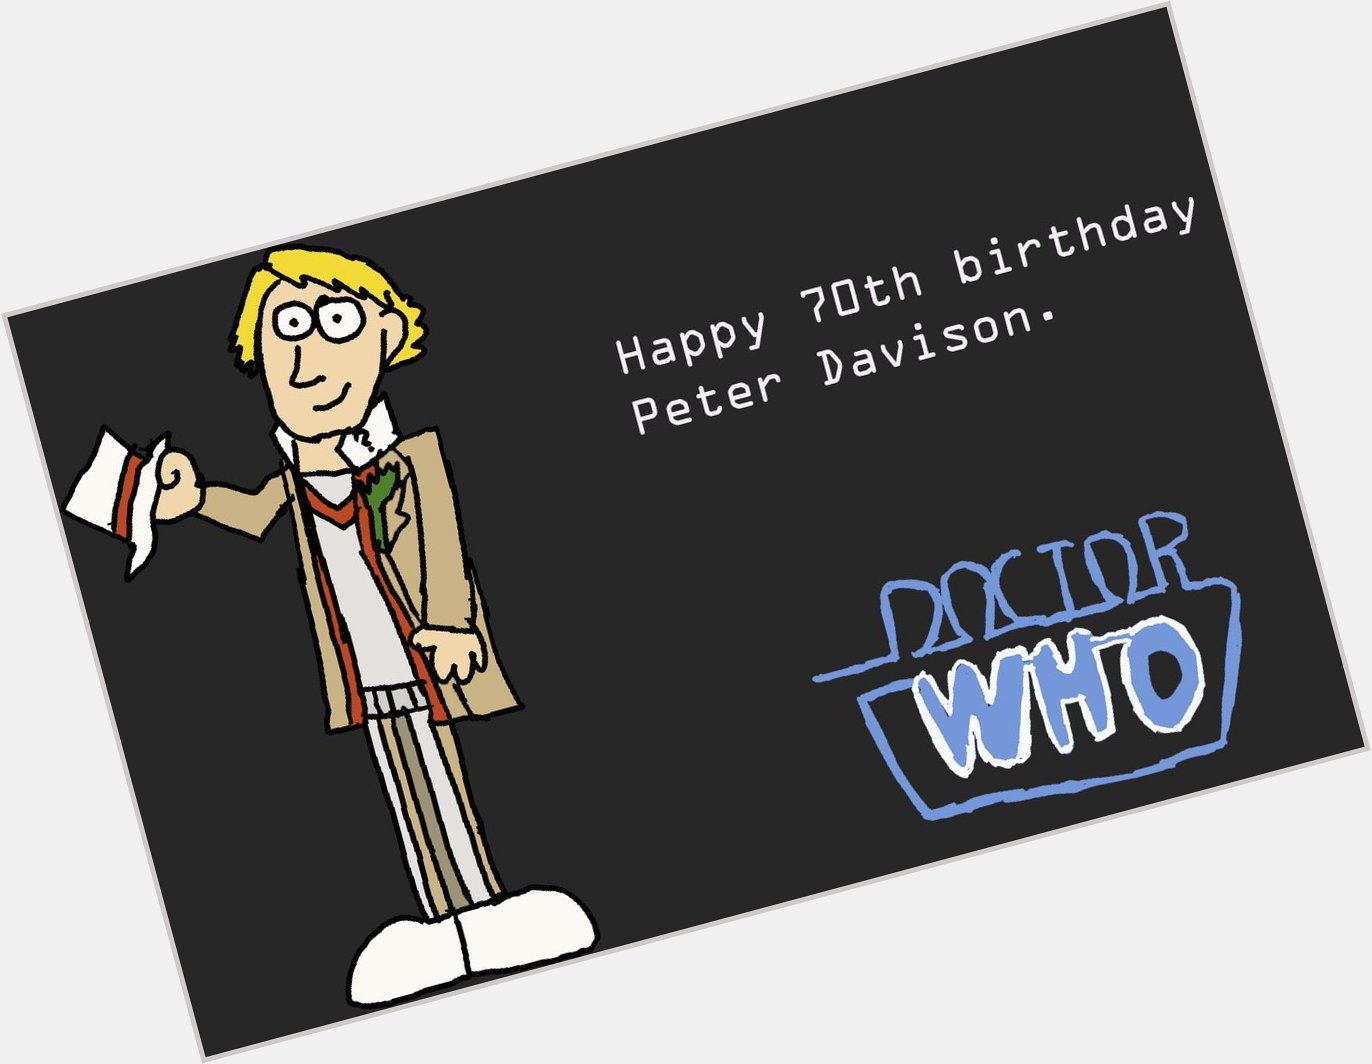 Another birthday pic for another classic Doctor. Happy 70th birthday to Peter Davison, A.K.A. the Fifth Doctor. 